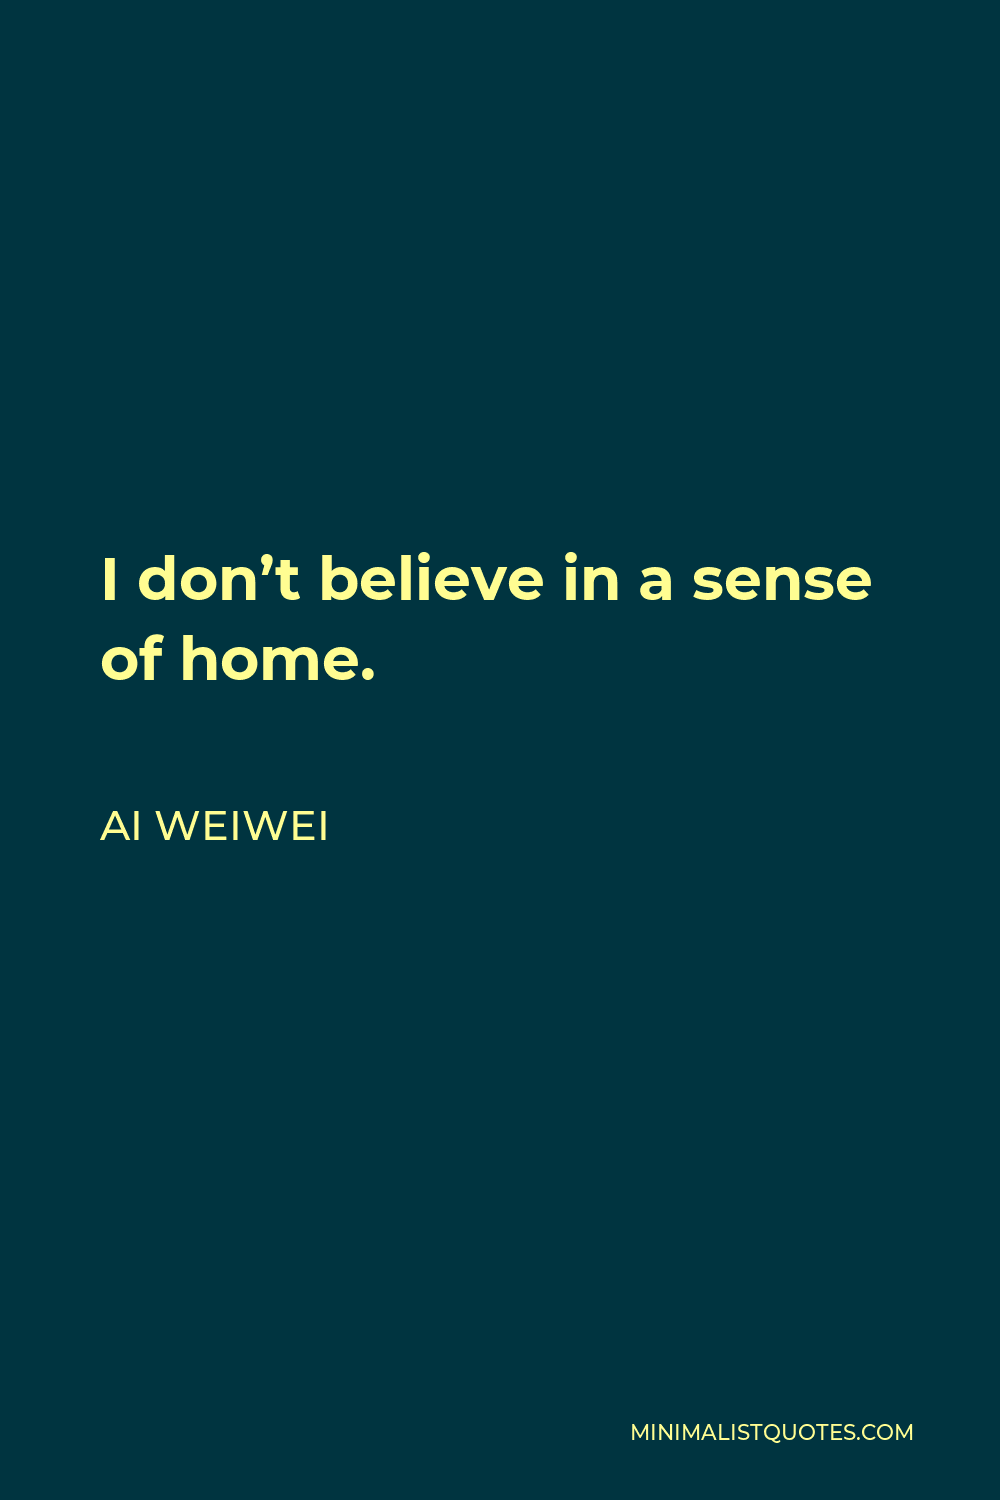 Ai Weiwei Quote - I don’t believe in a sense of home.